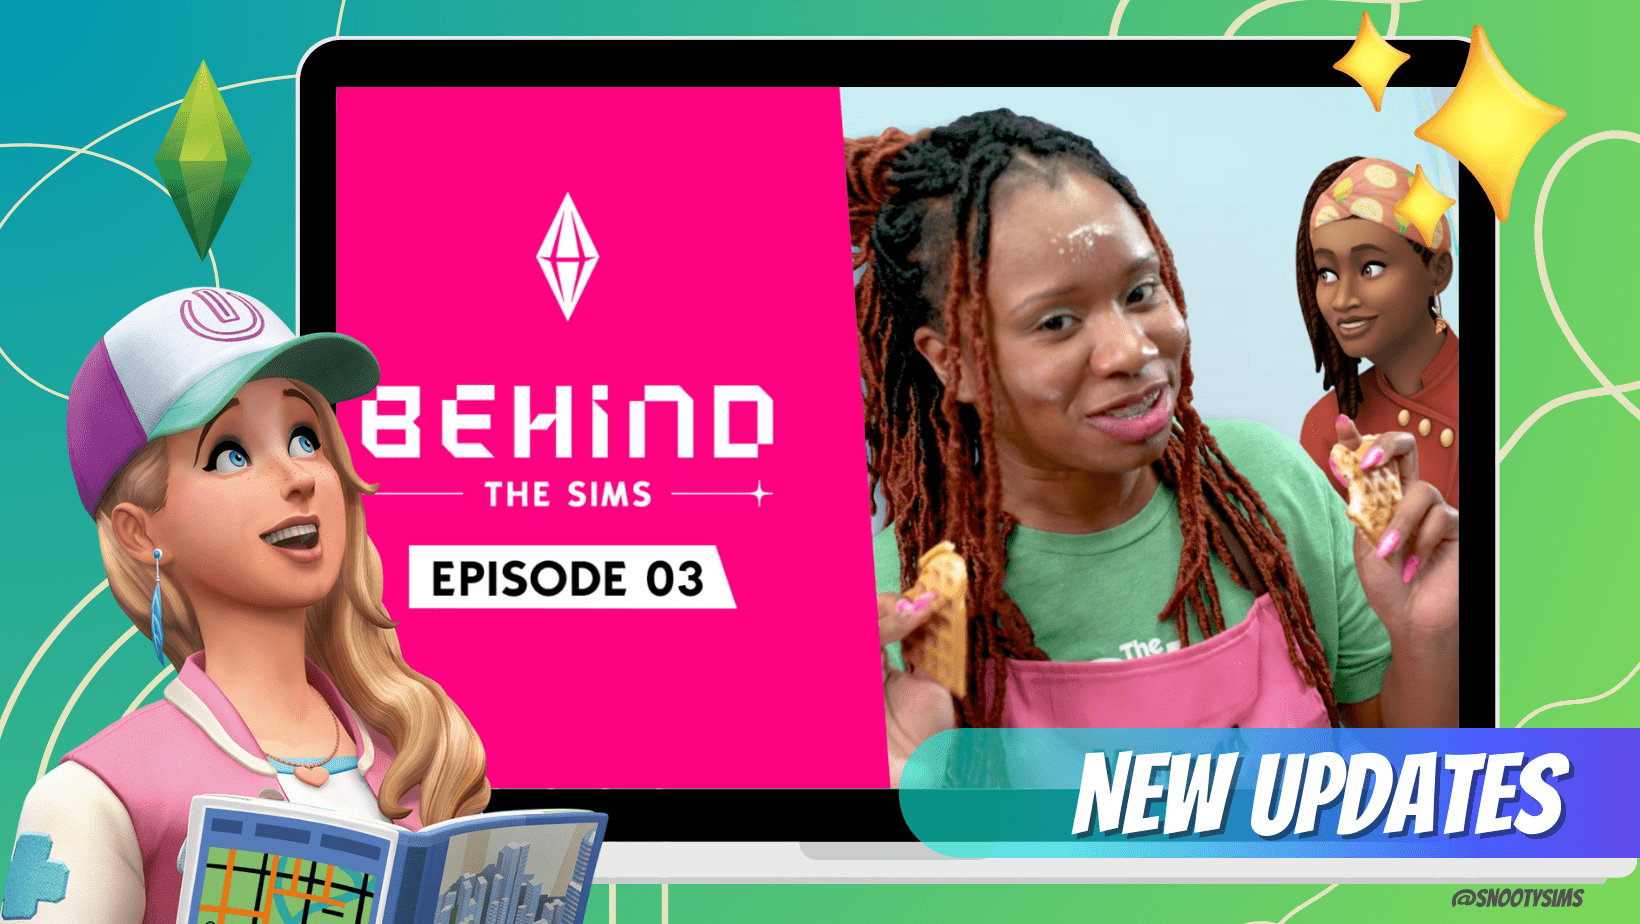 Behind The Sims Episode 03